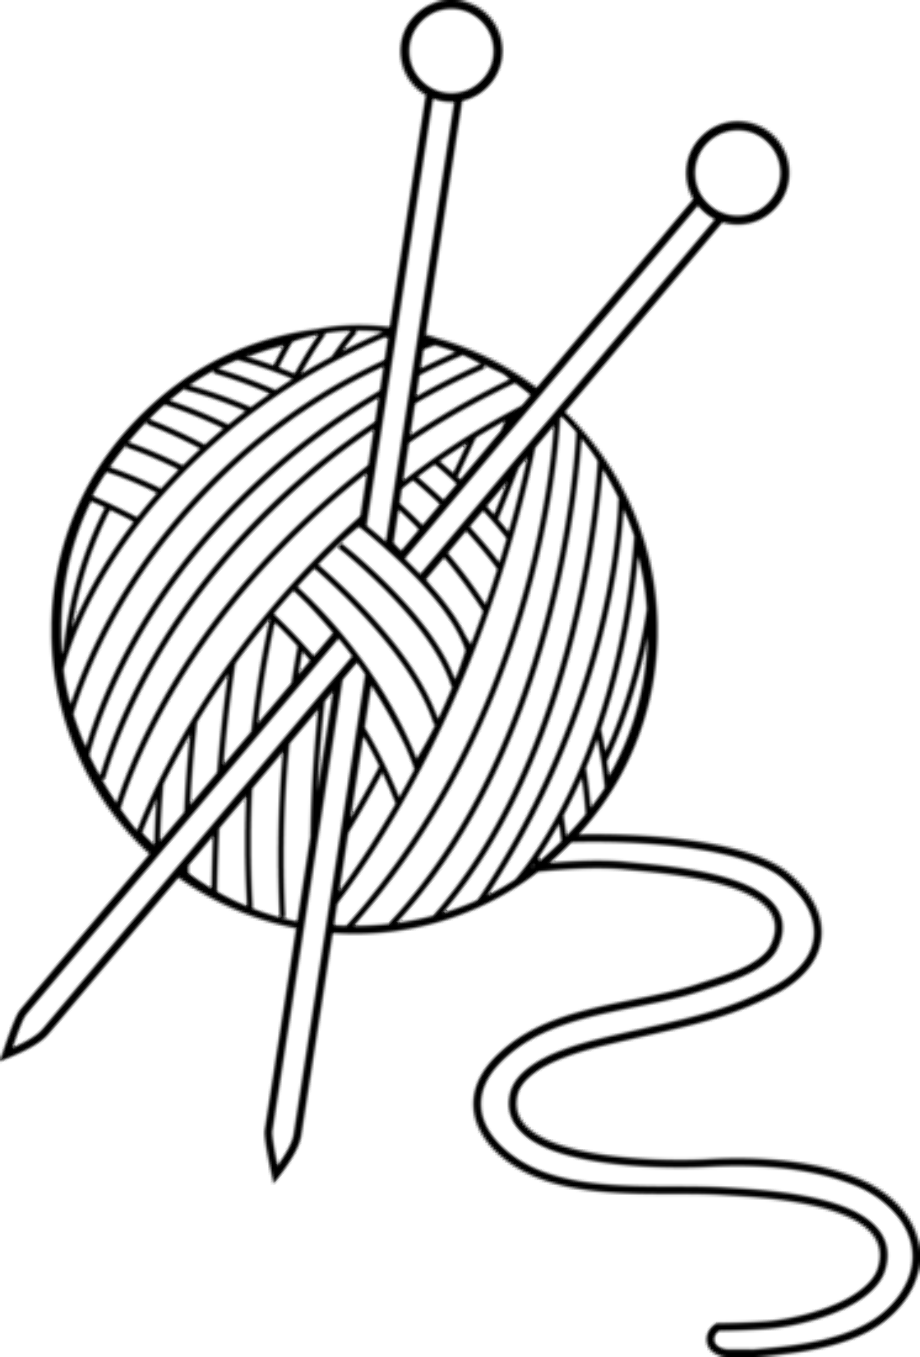 Download High Quality yarn clipart black Transparent PNG Images - Art ...